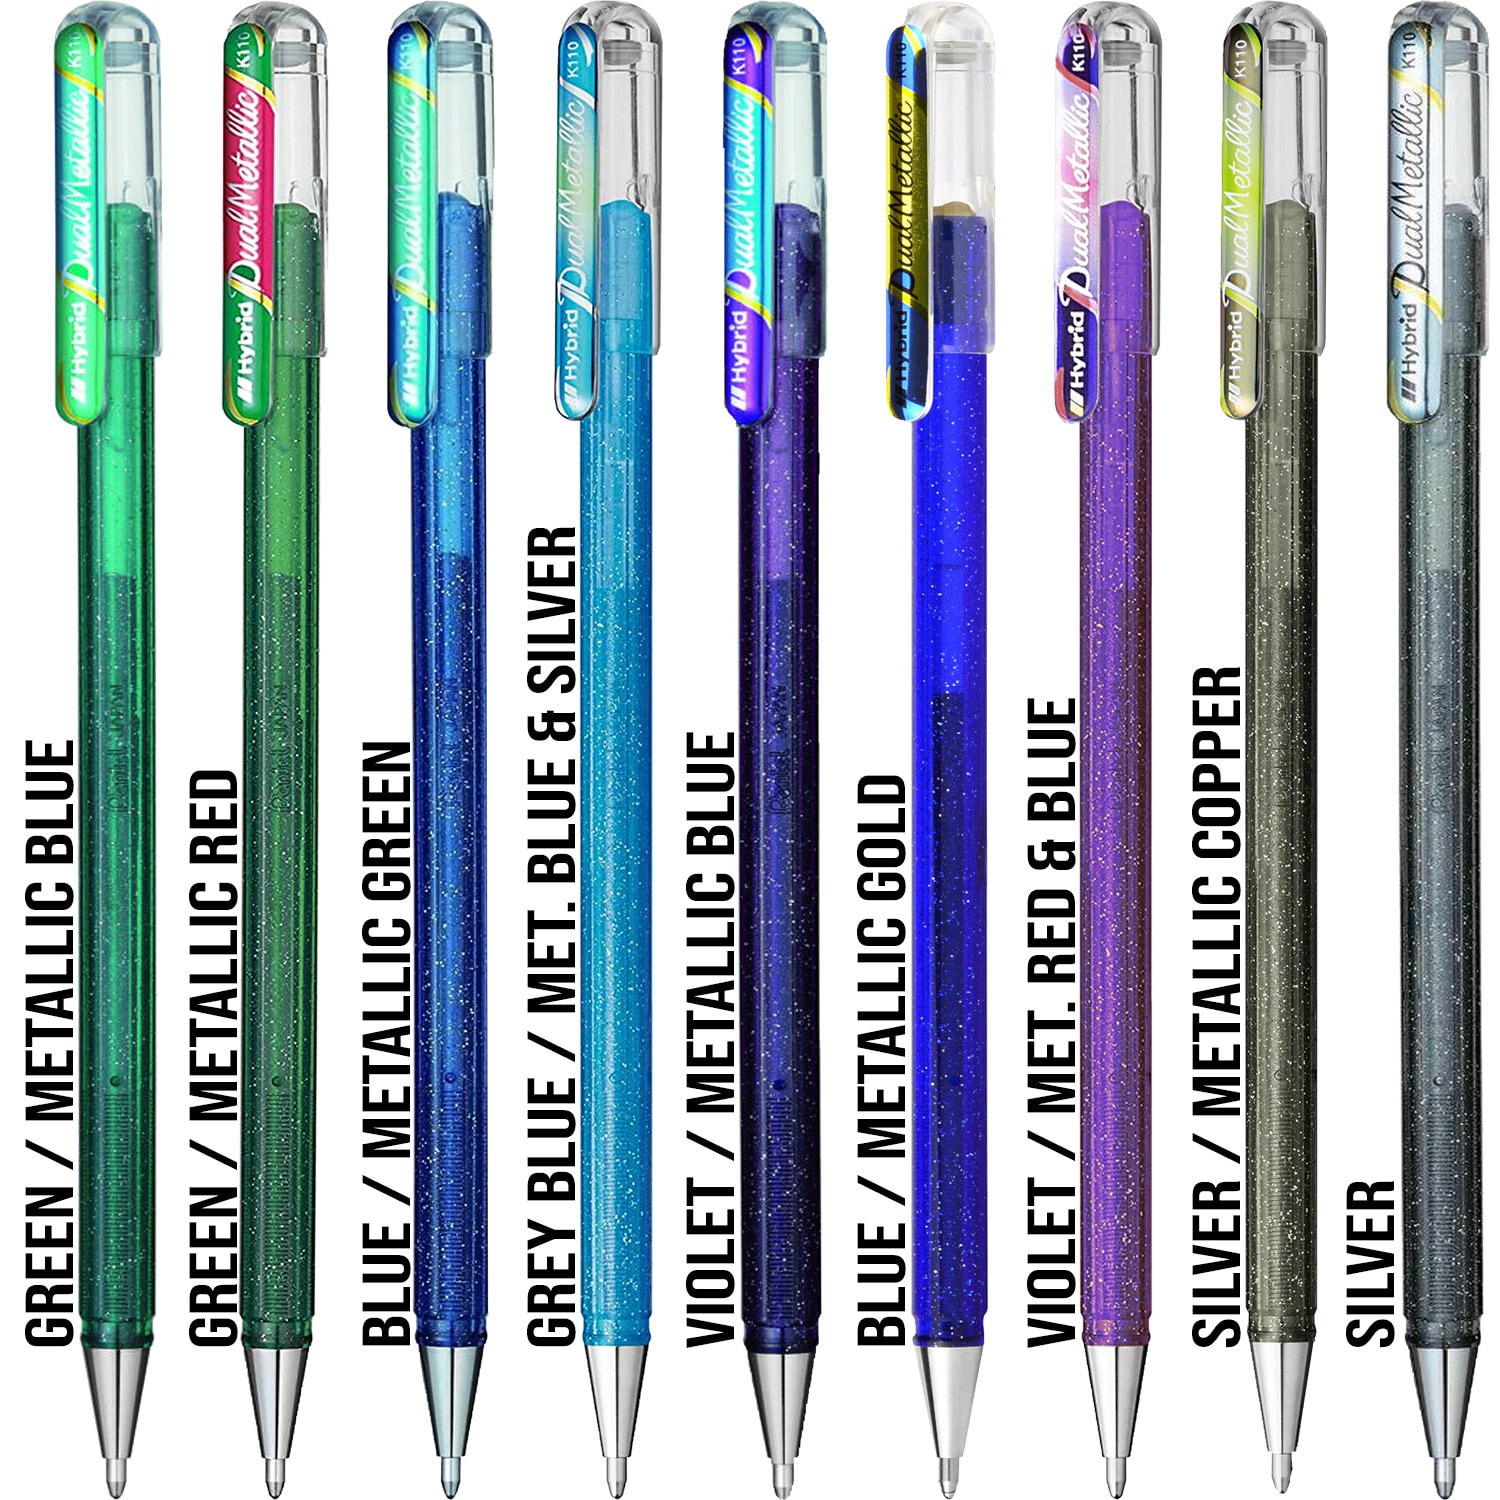 Pentel Dual Metallic Gel Pens Sparkly Glitter Metallic Pens Calligraphy  Drawing Drafting Art Design & Crafts Silver, Gold and More 